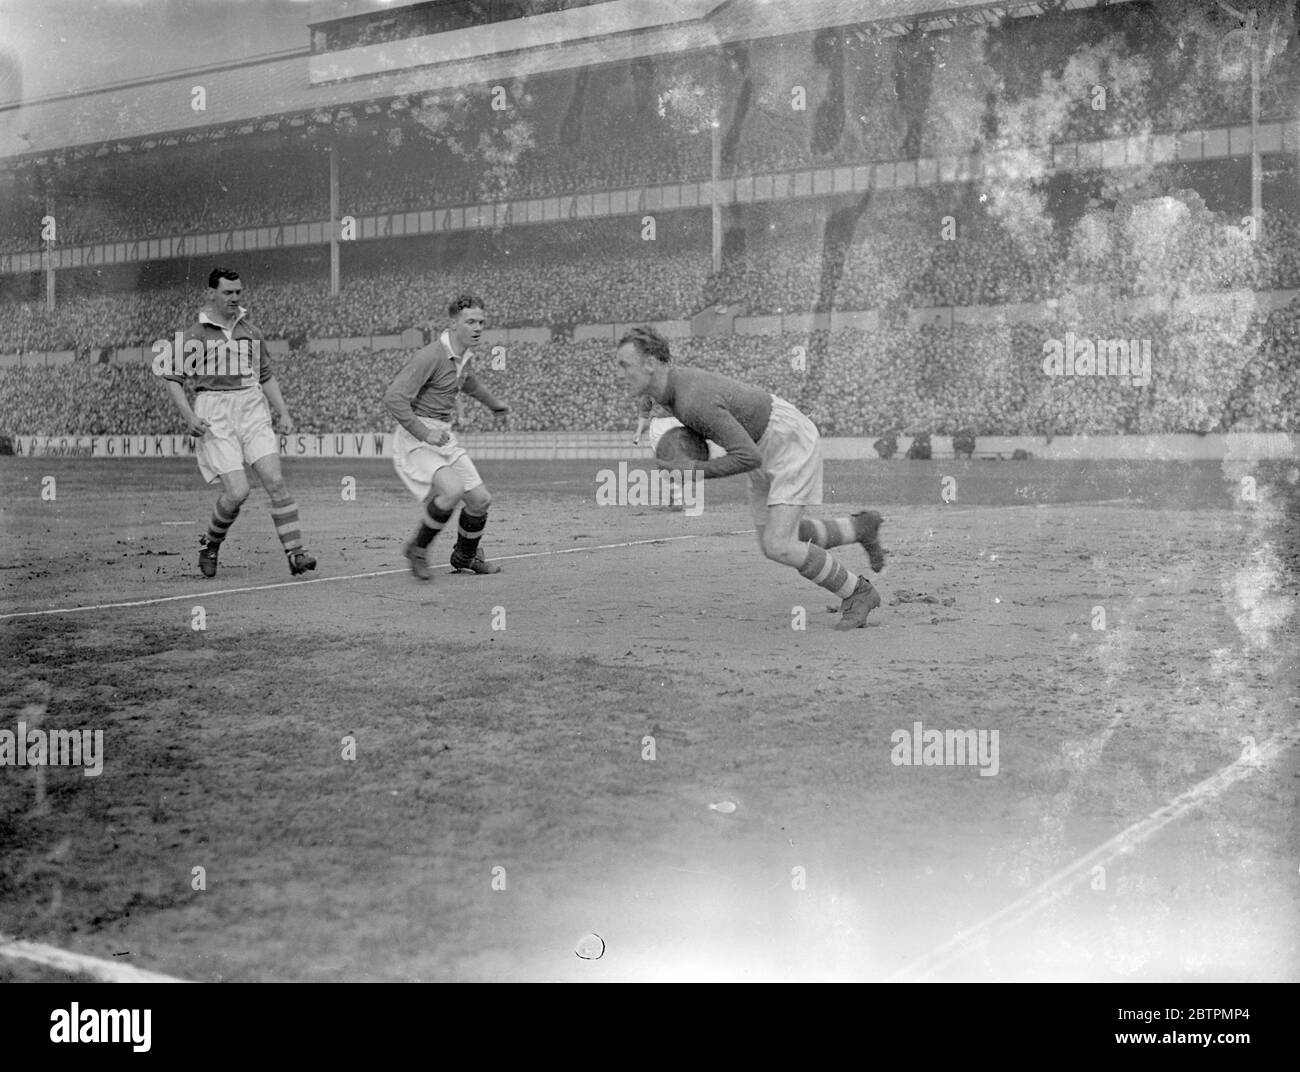 Cup tie at Tottenham . Tottenham Hotspur and Preston North End met in the sixth round of the F A Cup at WHite Hart Lane . Photo shows , John Alfred Morrison of Spurs rushing the Preston goalkeeper , George Holdcroft . 6 March 1937 Stock Photo